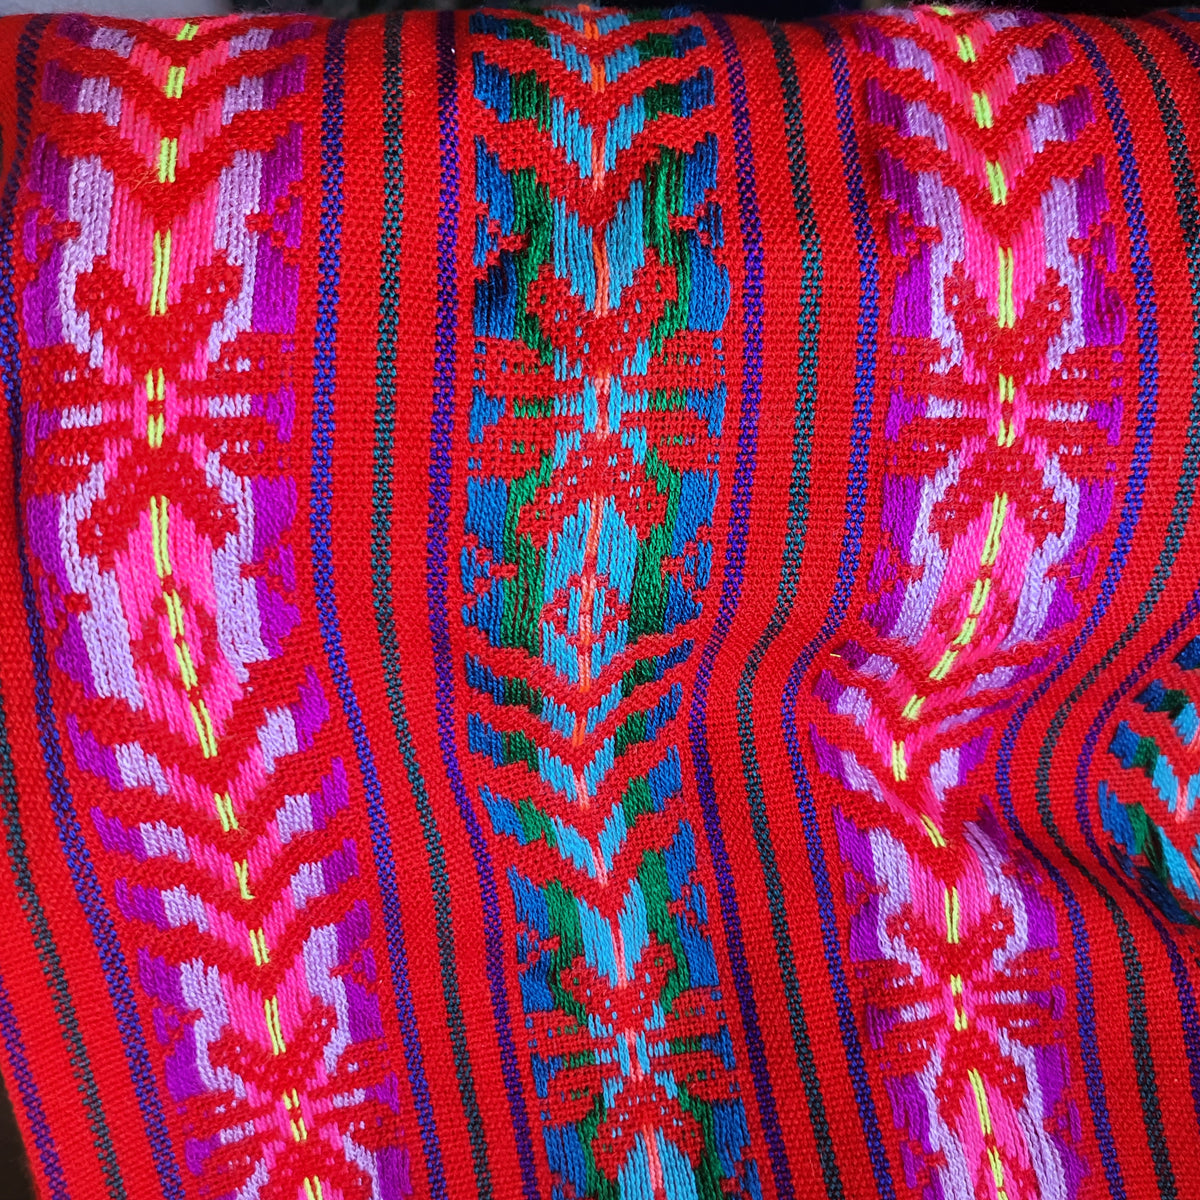 Loom Red Table Runner, Mexican table runner, fringed, cambaya